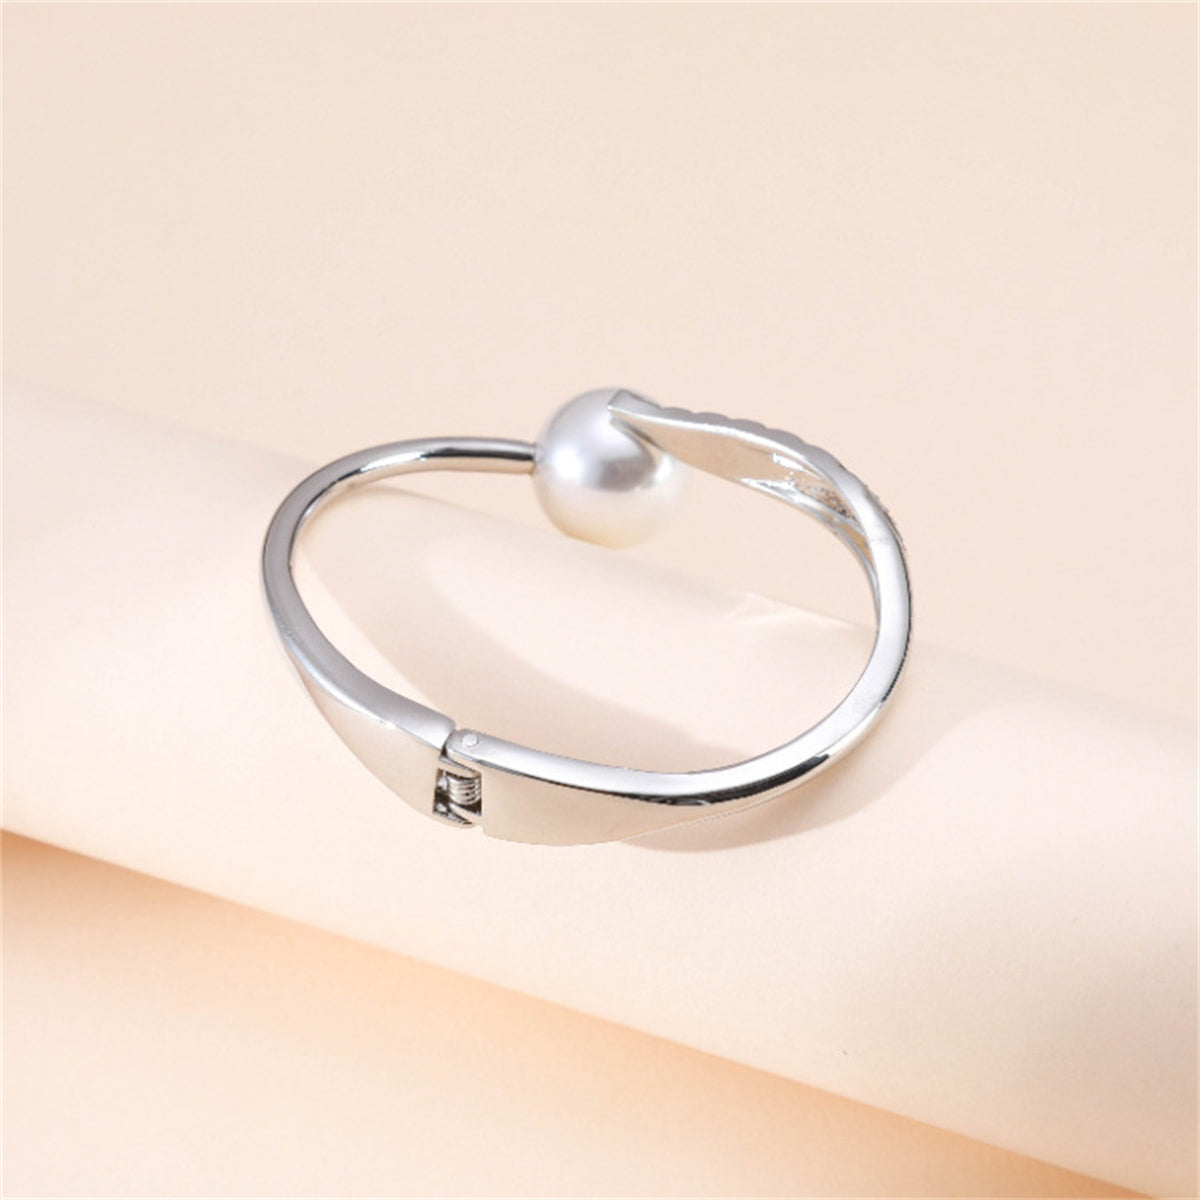 White Pearl & Cubic Zirconia Silver-Plated Leaf Hinge Bangle